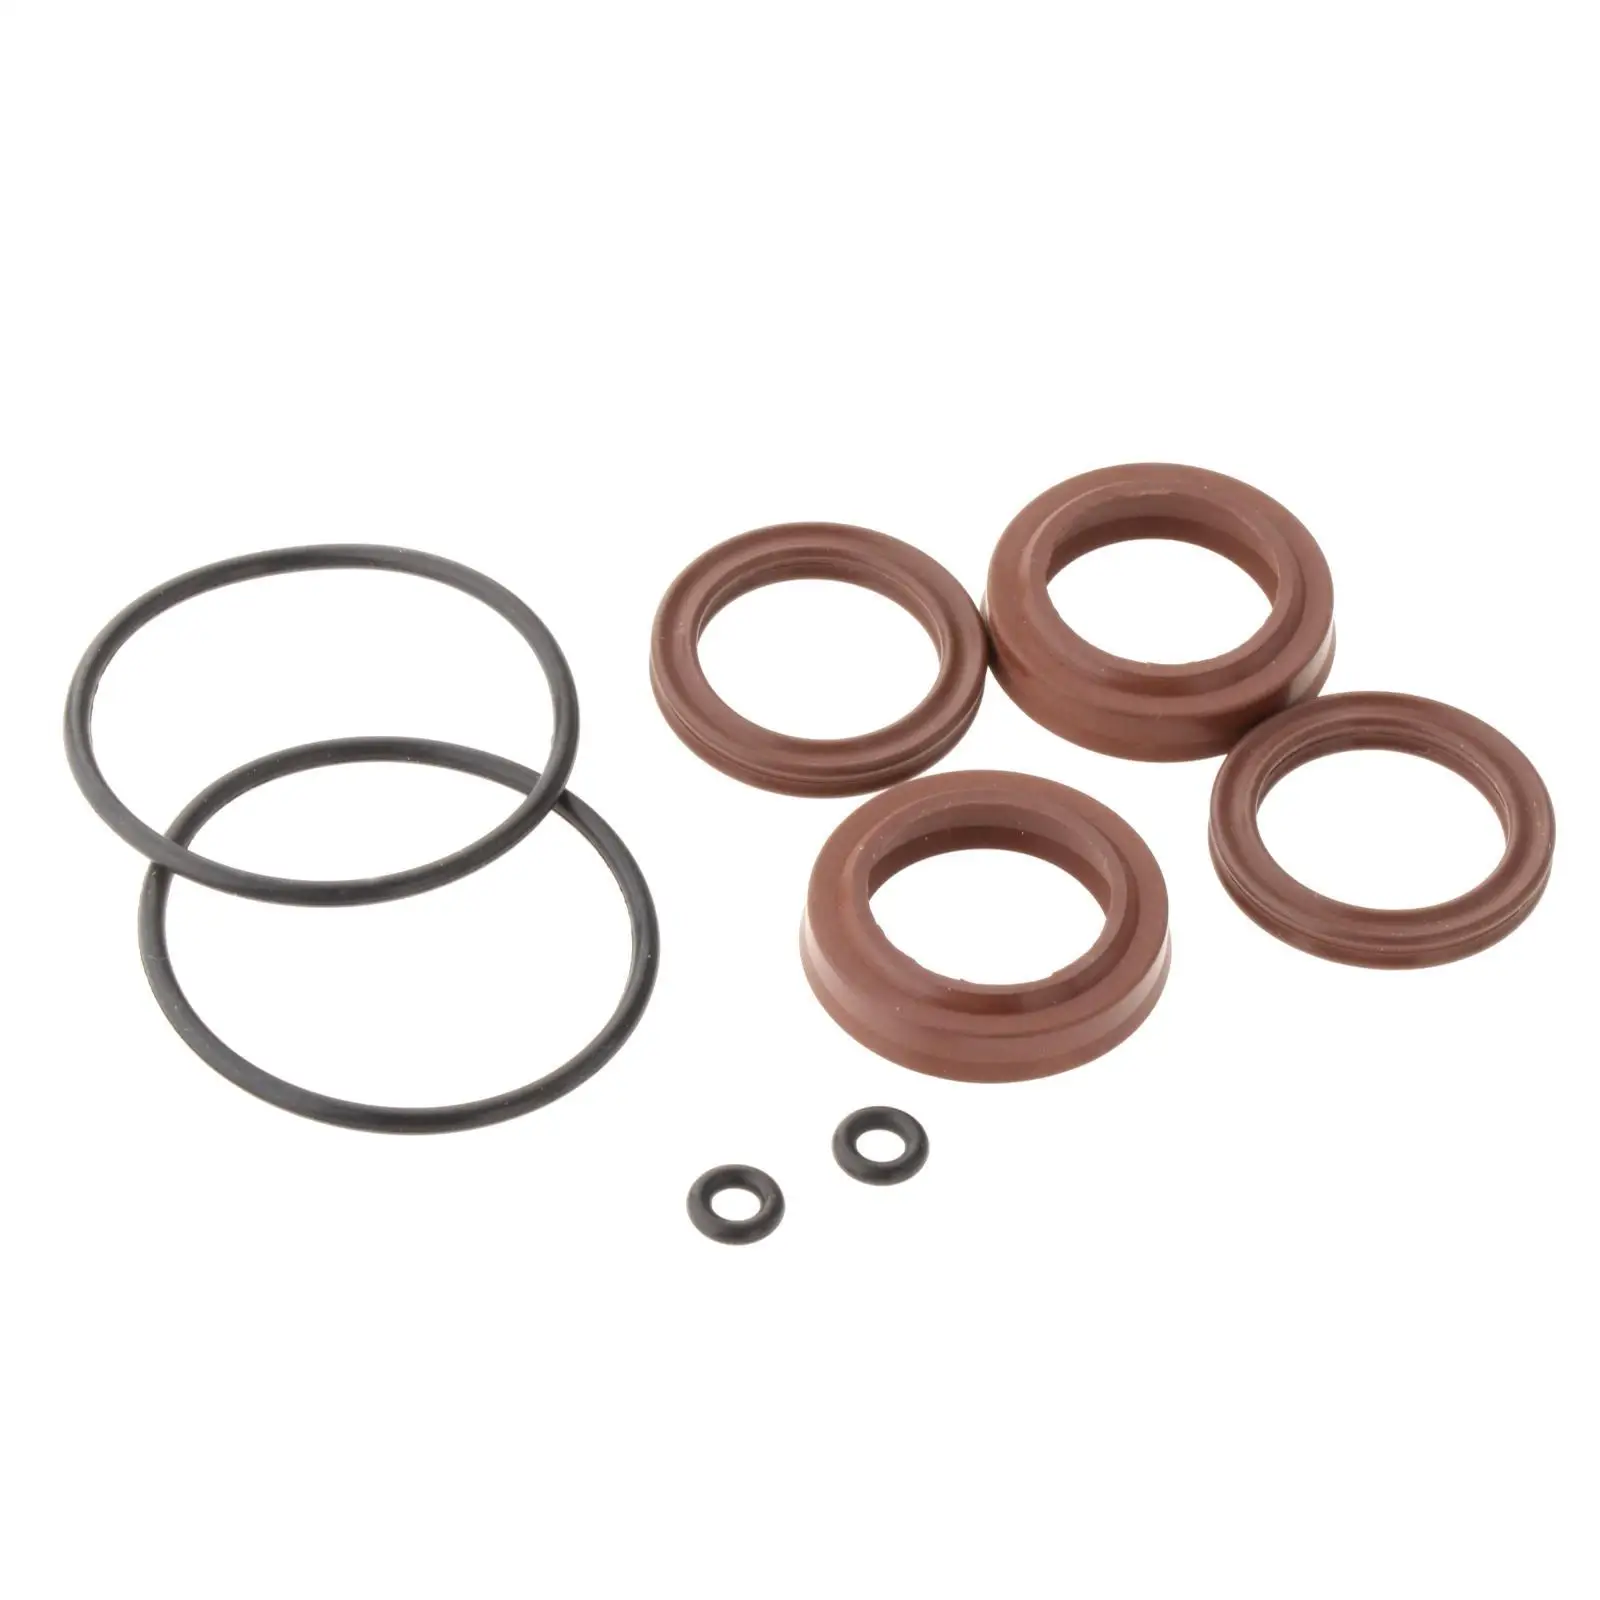 Seastar Steering Cylinder replacement seal kit HC5345+Others FSM051